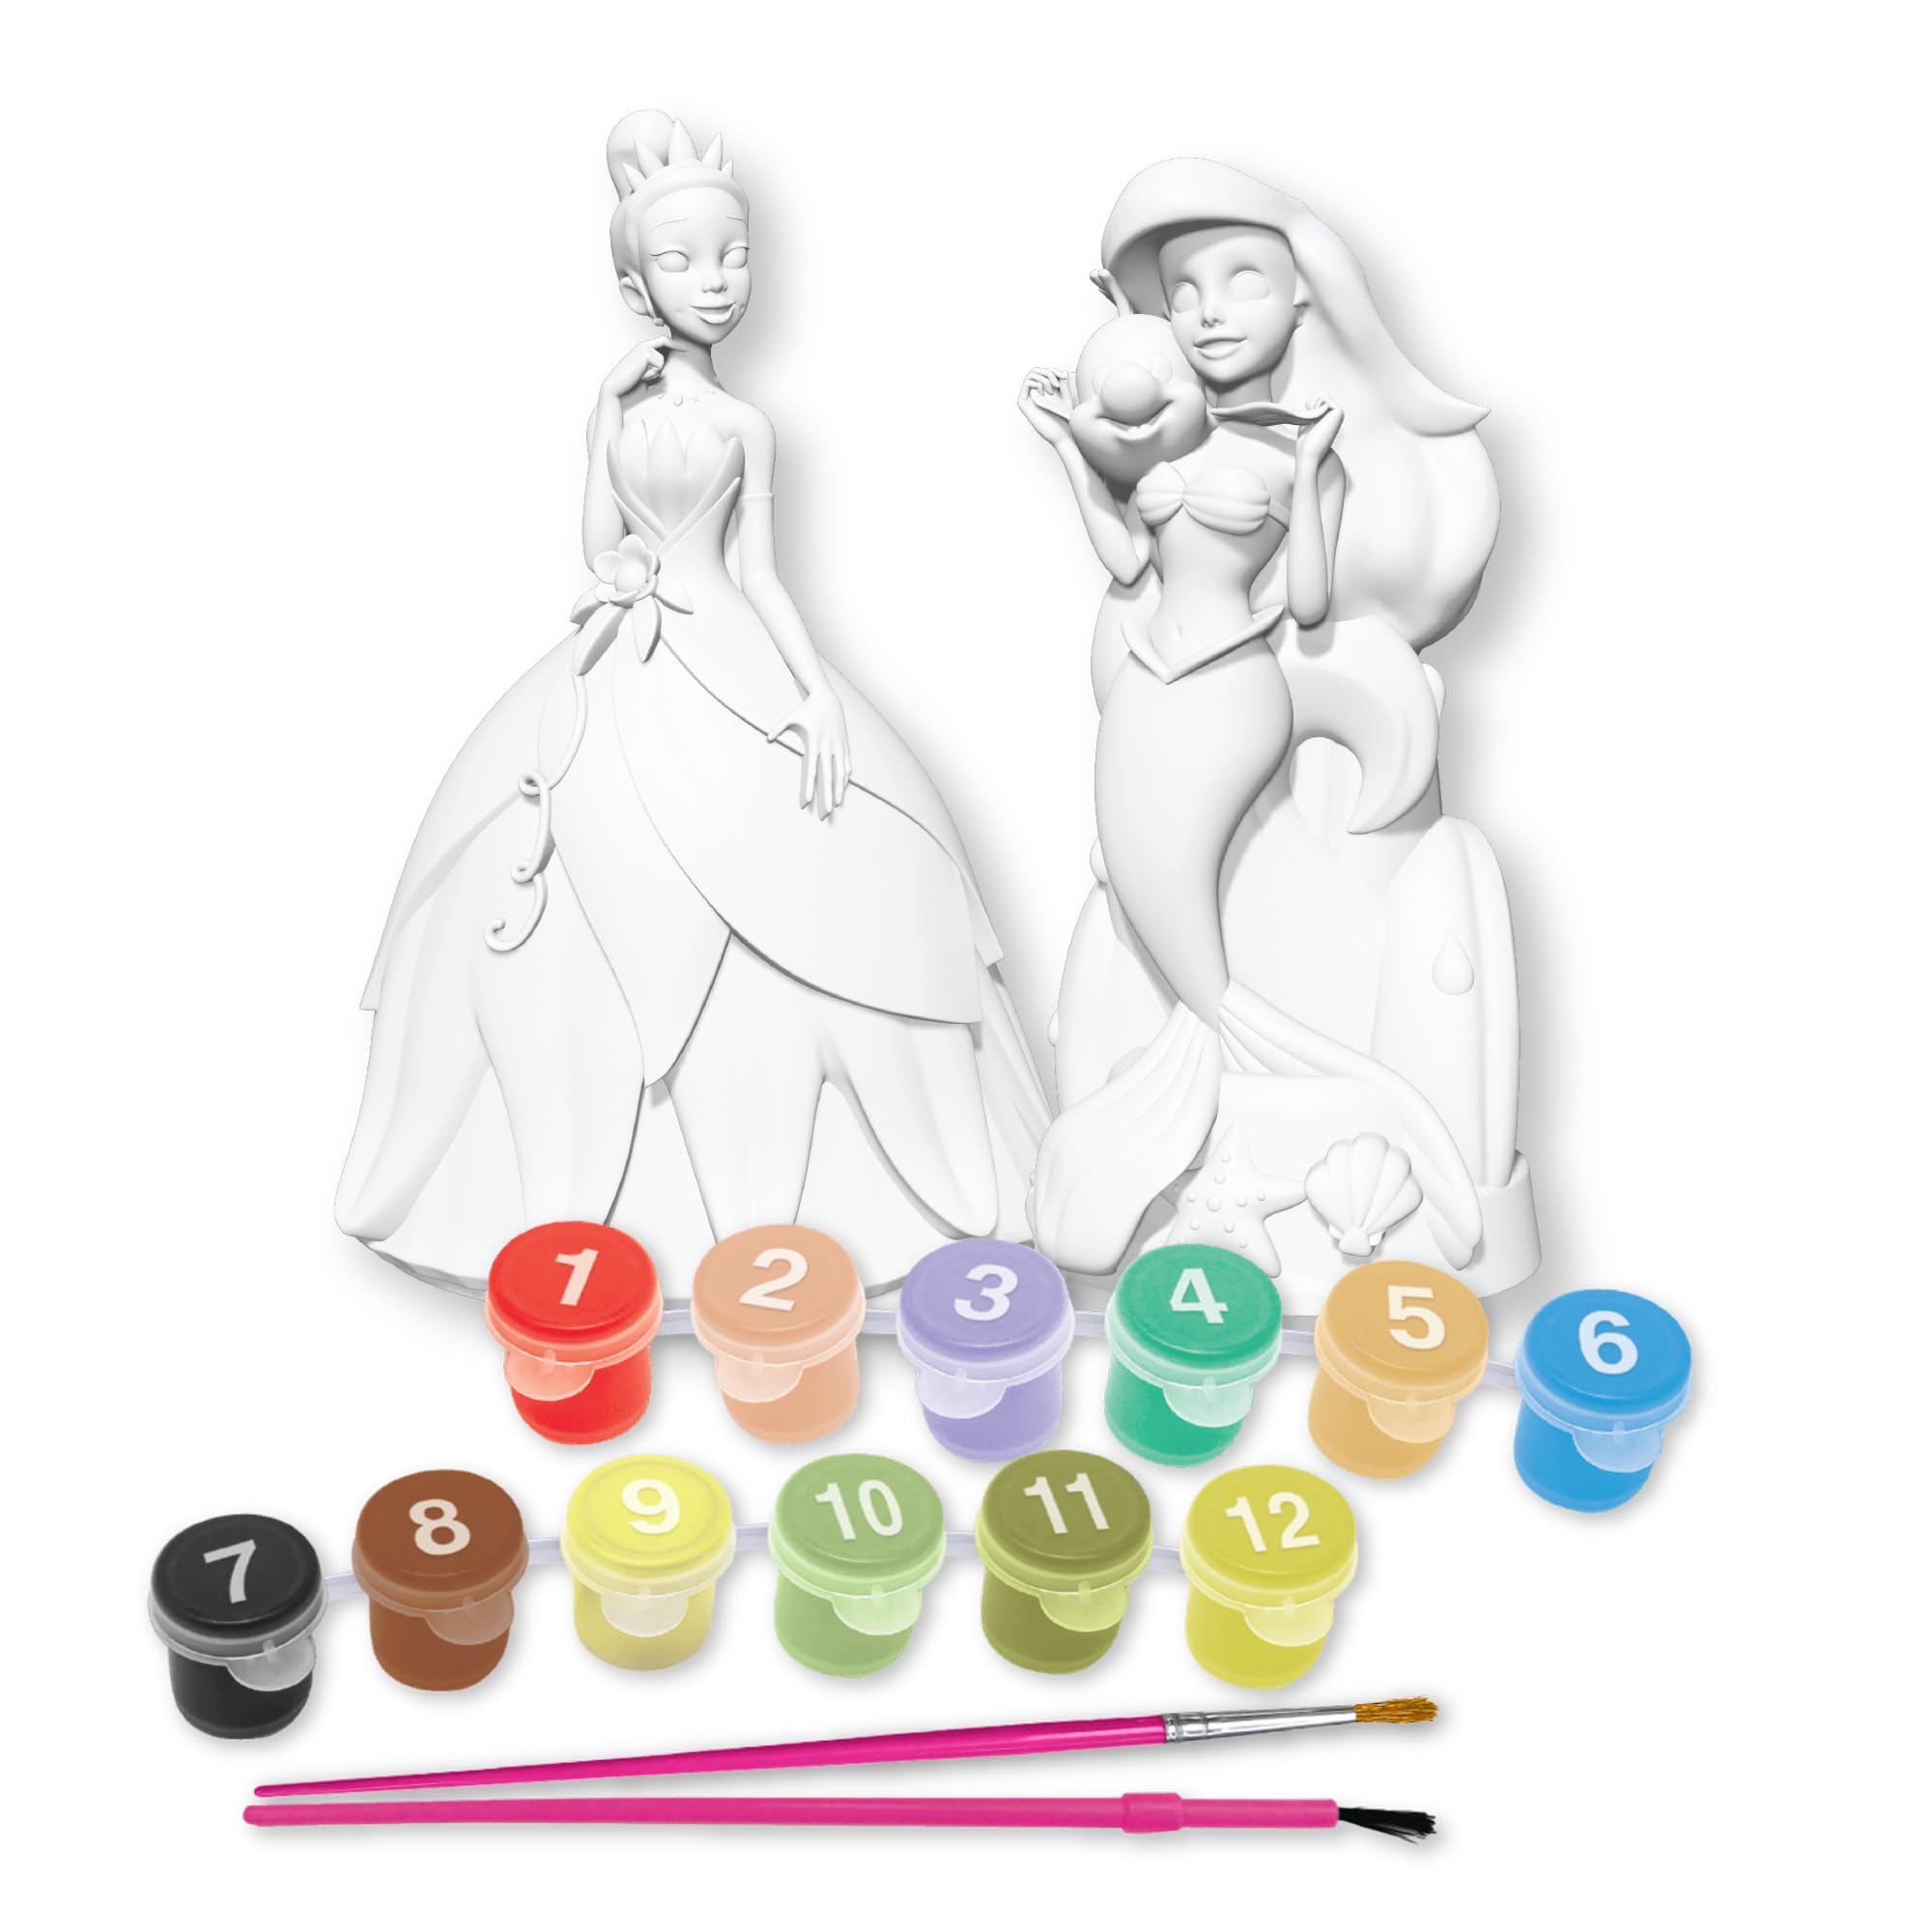 Tara Toy Princess Paint Your Own Figurines